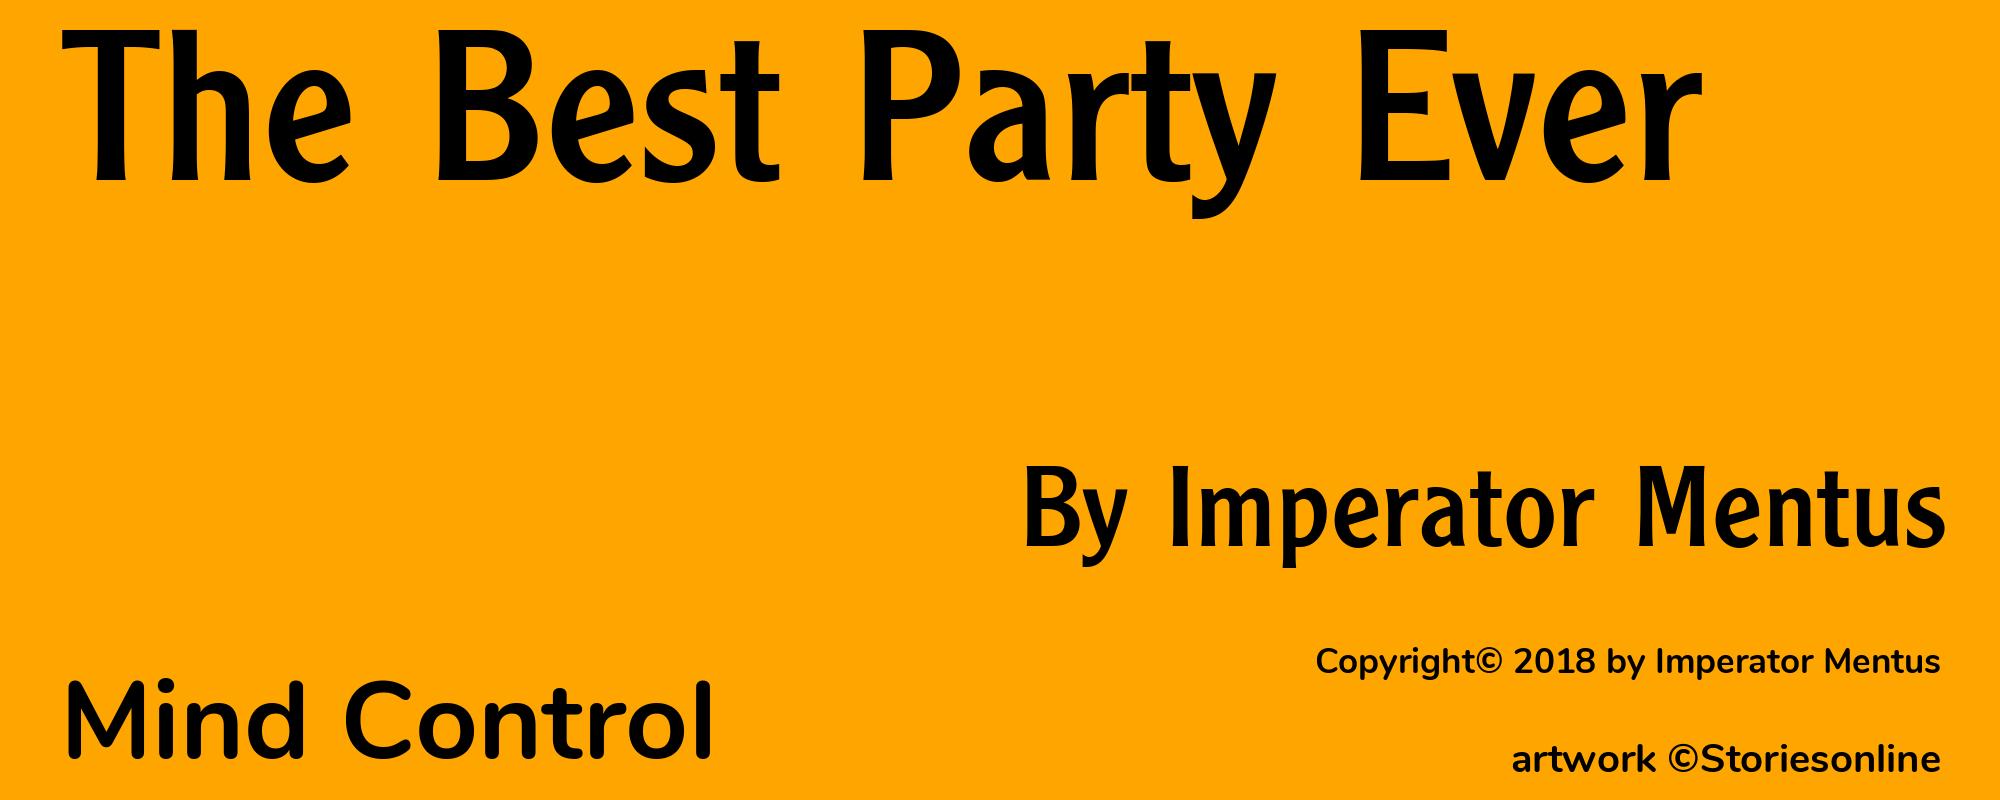 The Best Party Ever - Cover